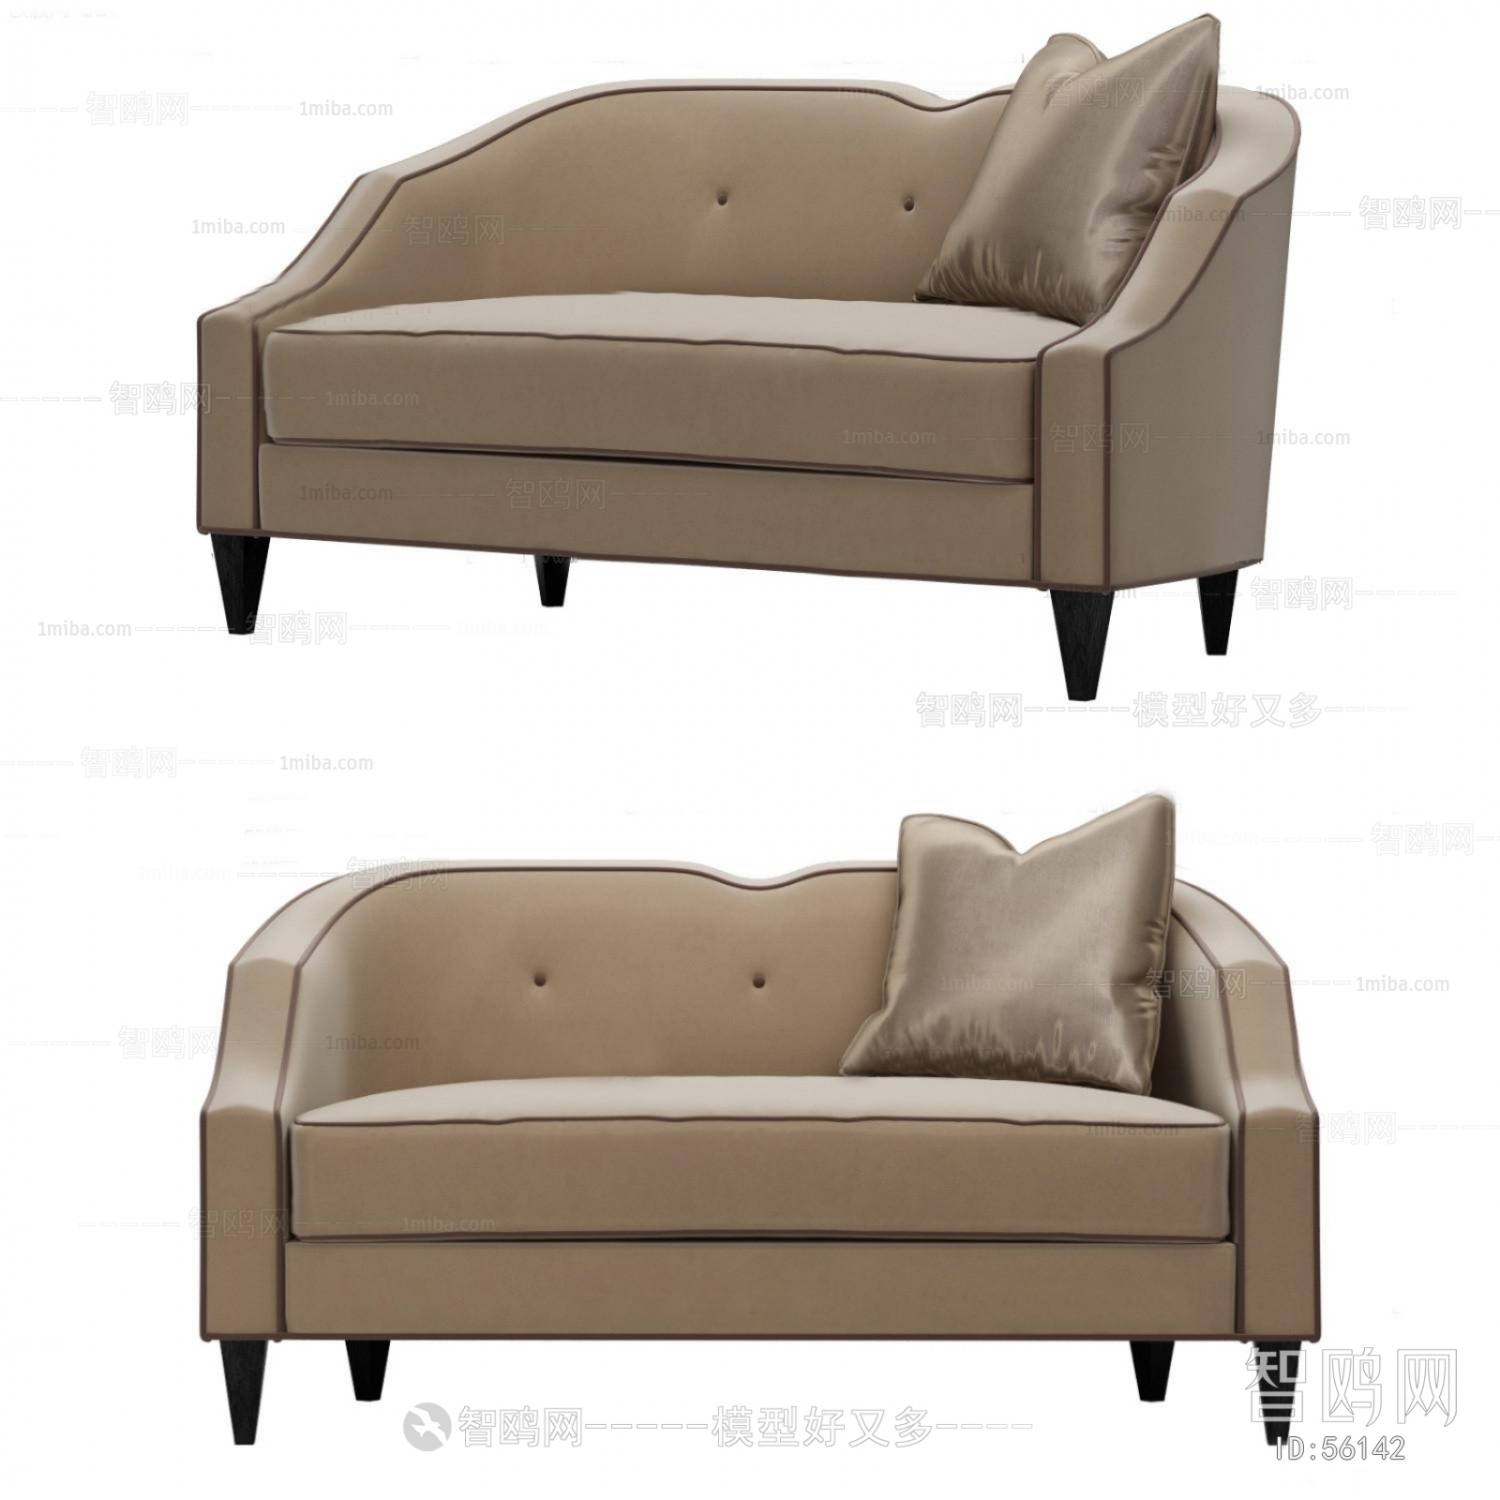 Post Modern Style A Sofa For Two